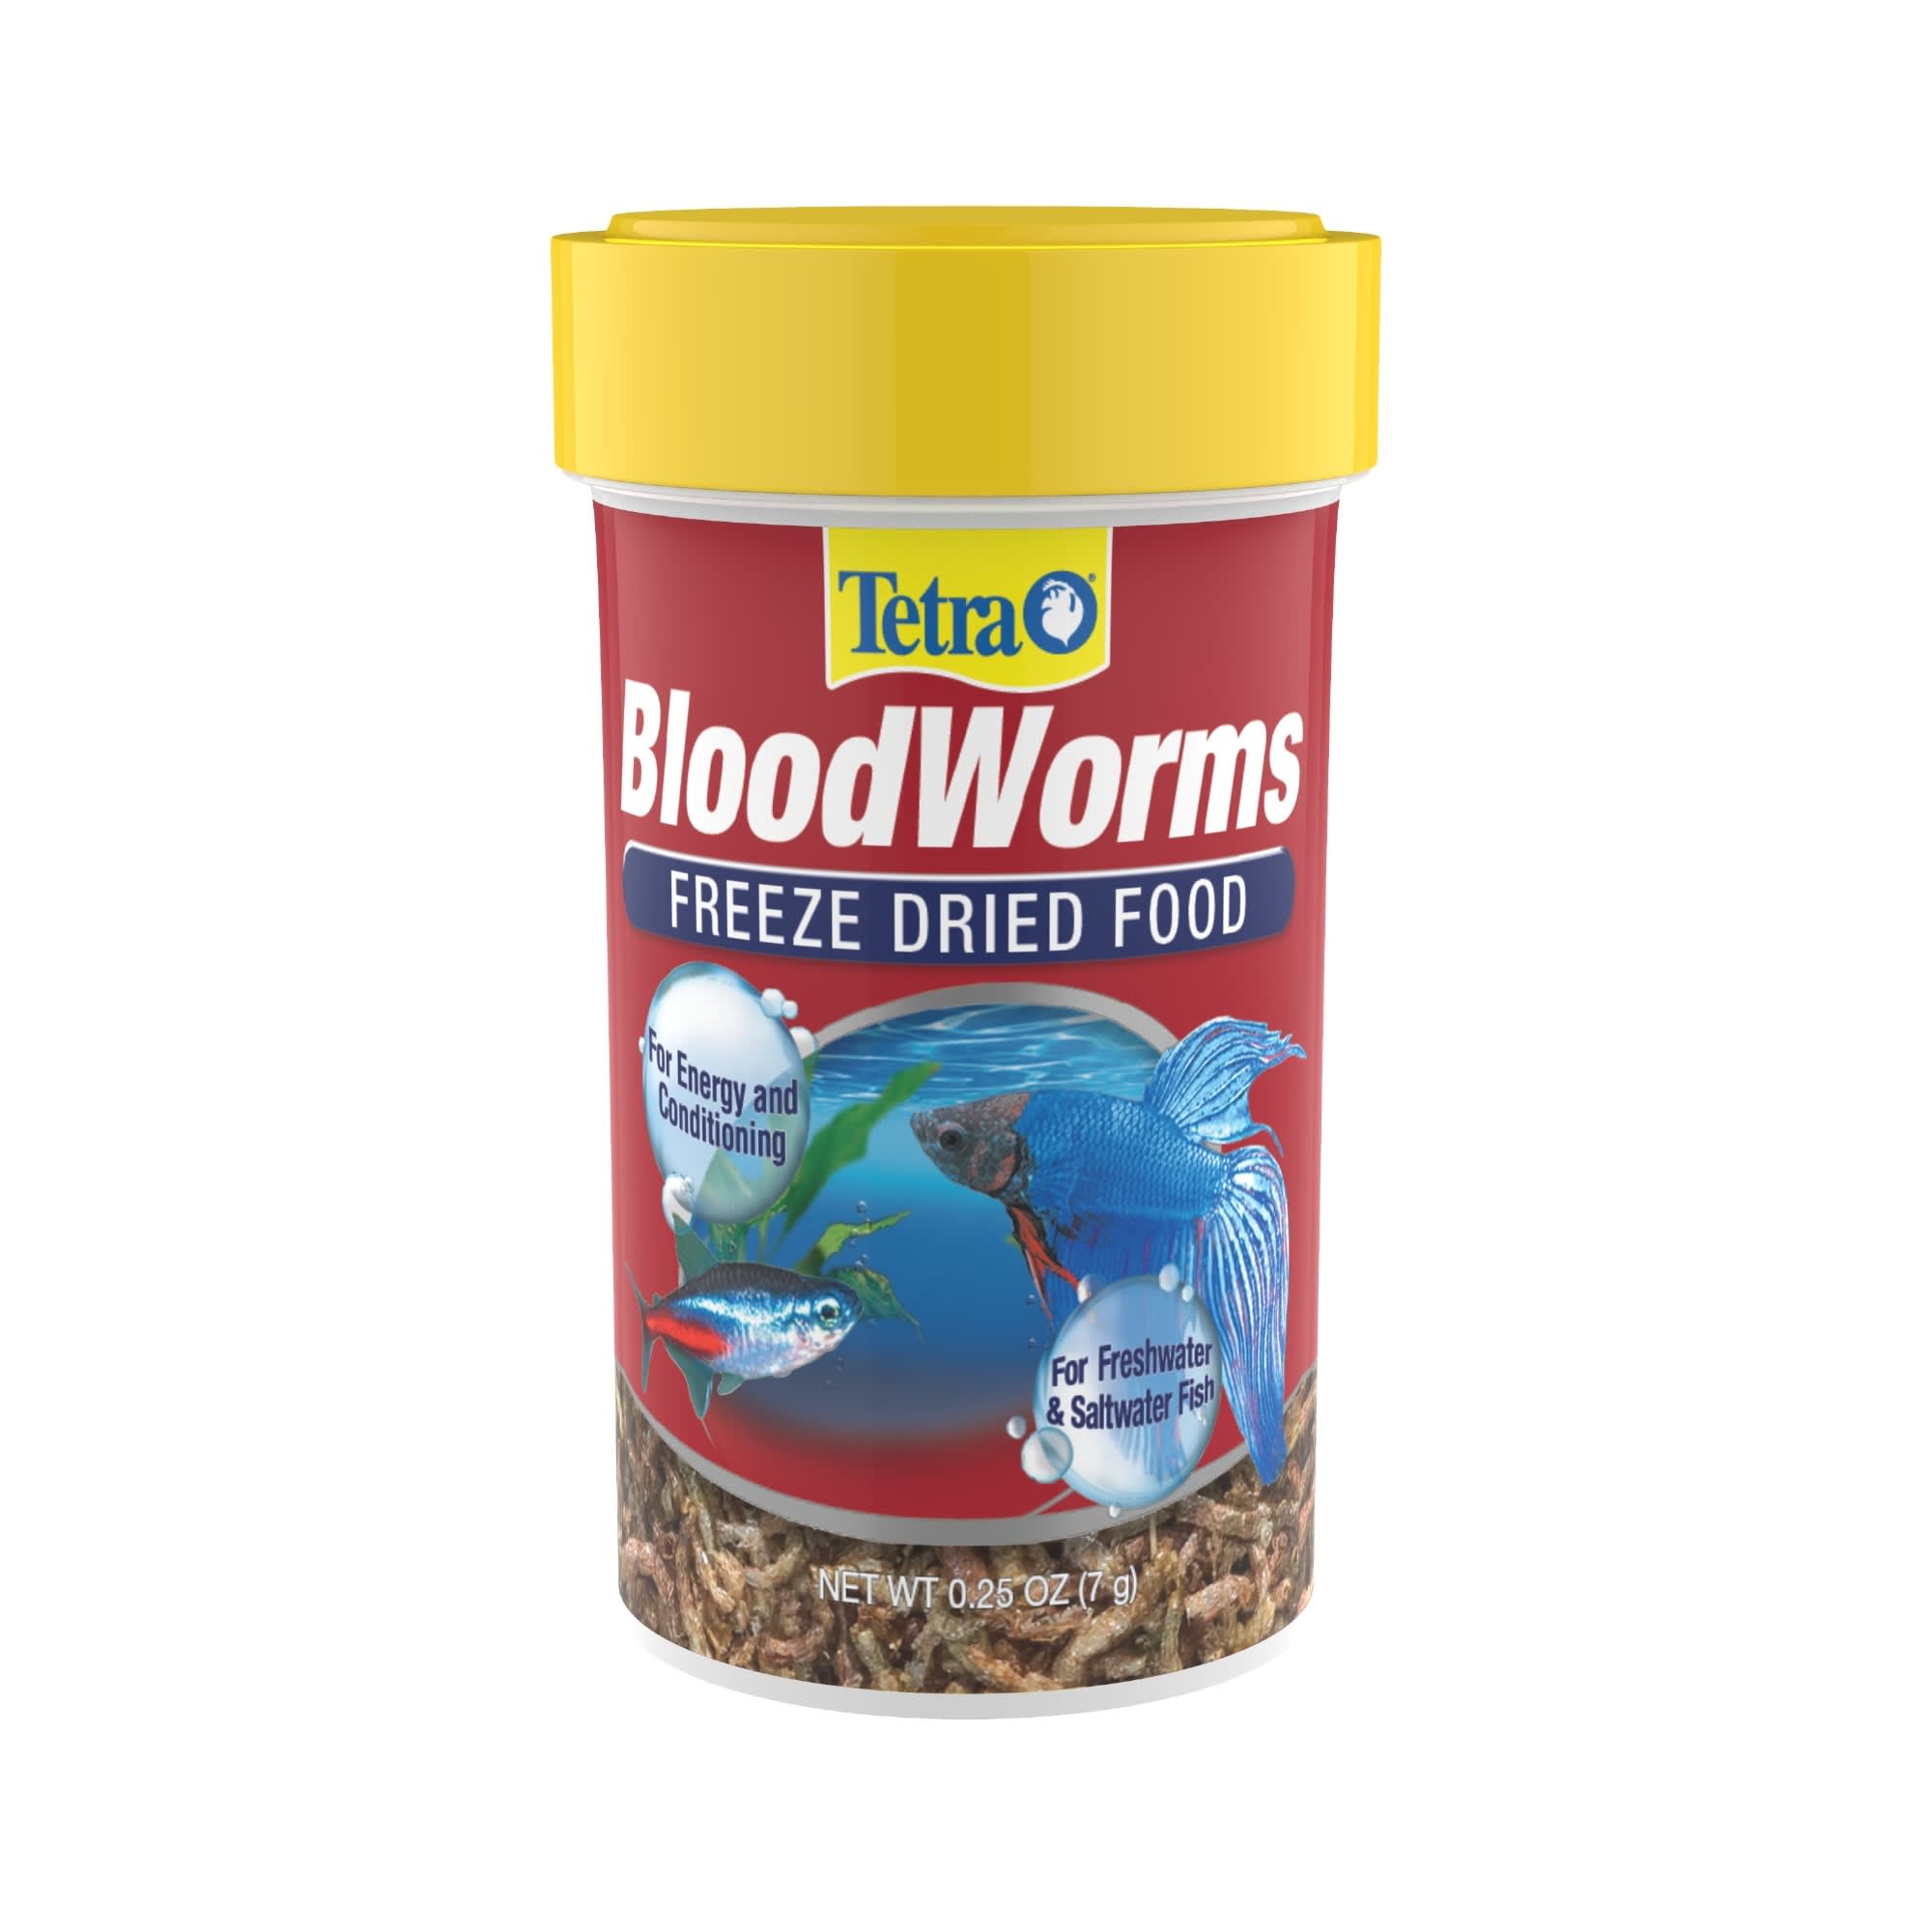 Tetra Bloodworms Freeze-Dried Food For Freshwater And Saltwater Fish, 0.25  oz.